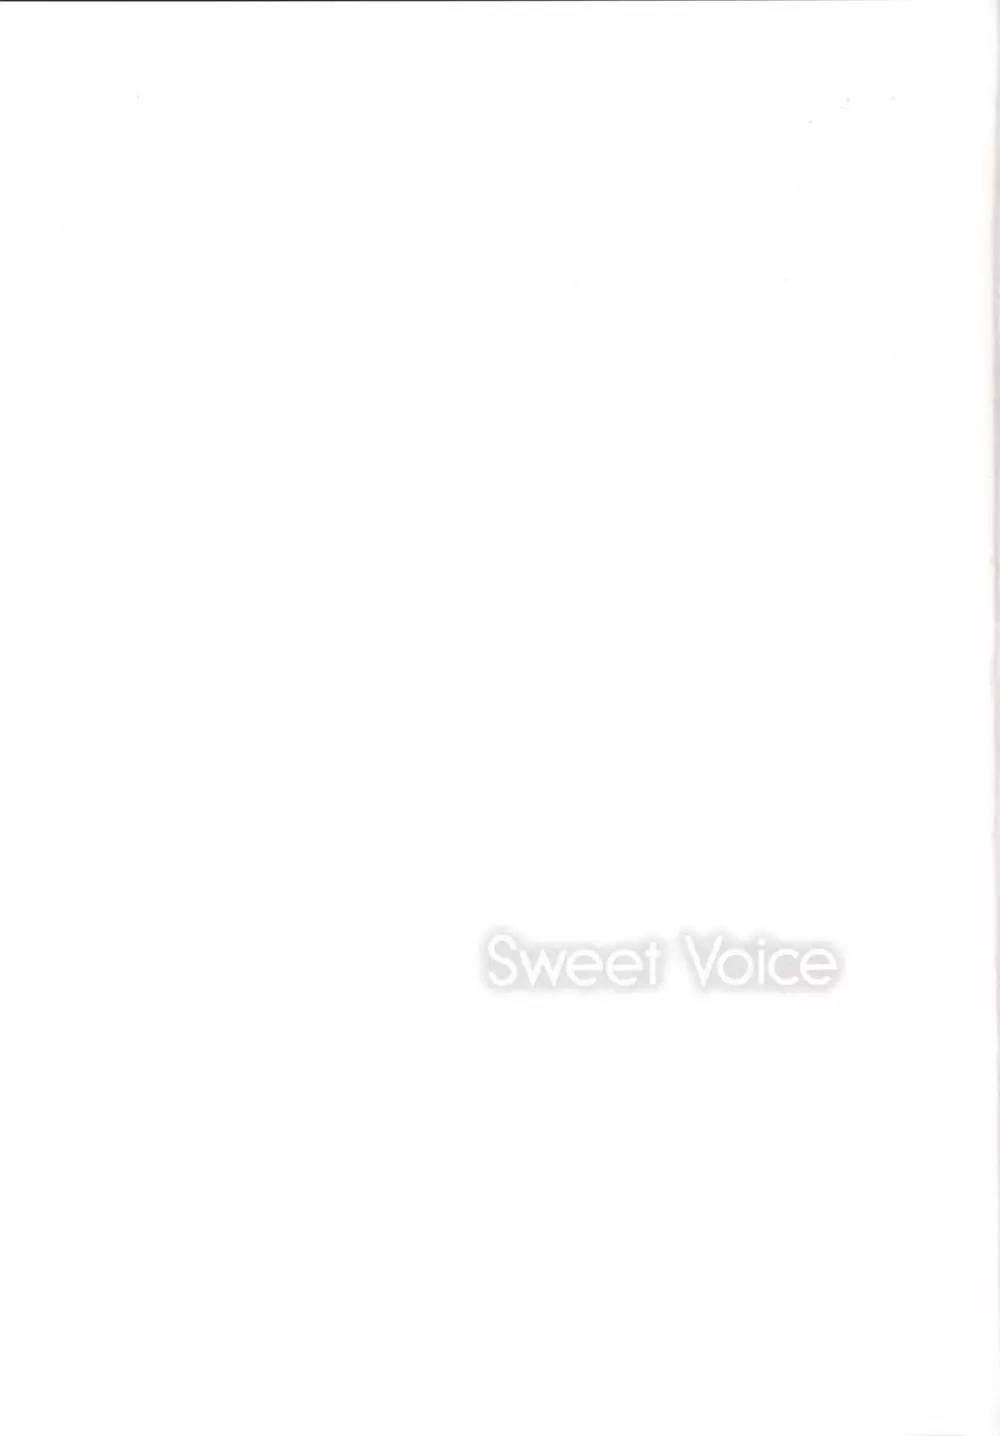 Sweet Voice Page.16